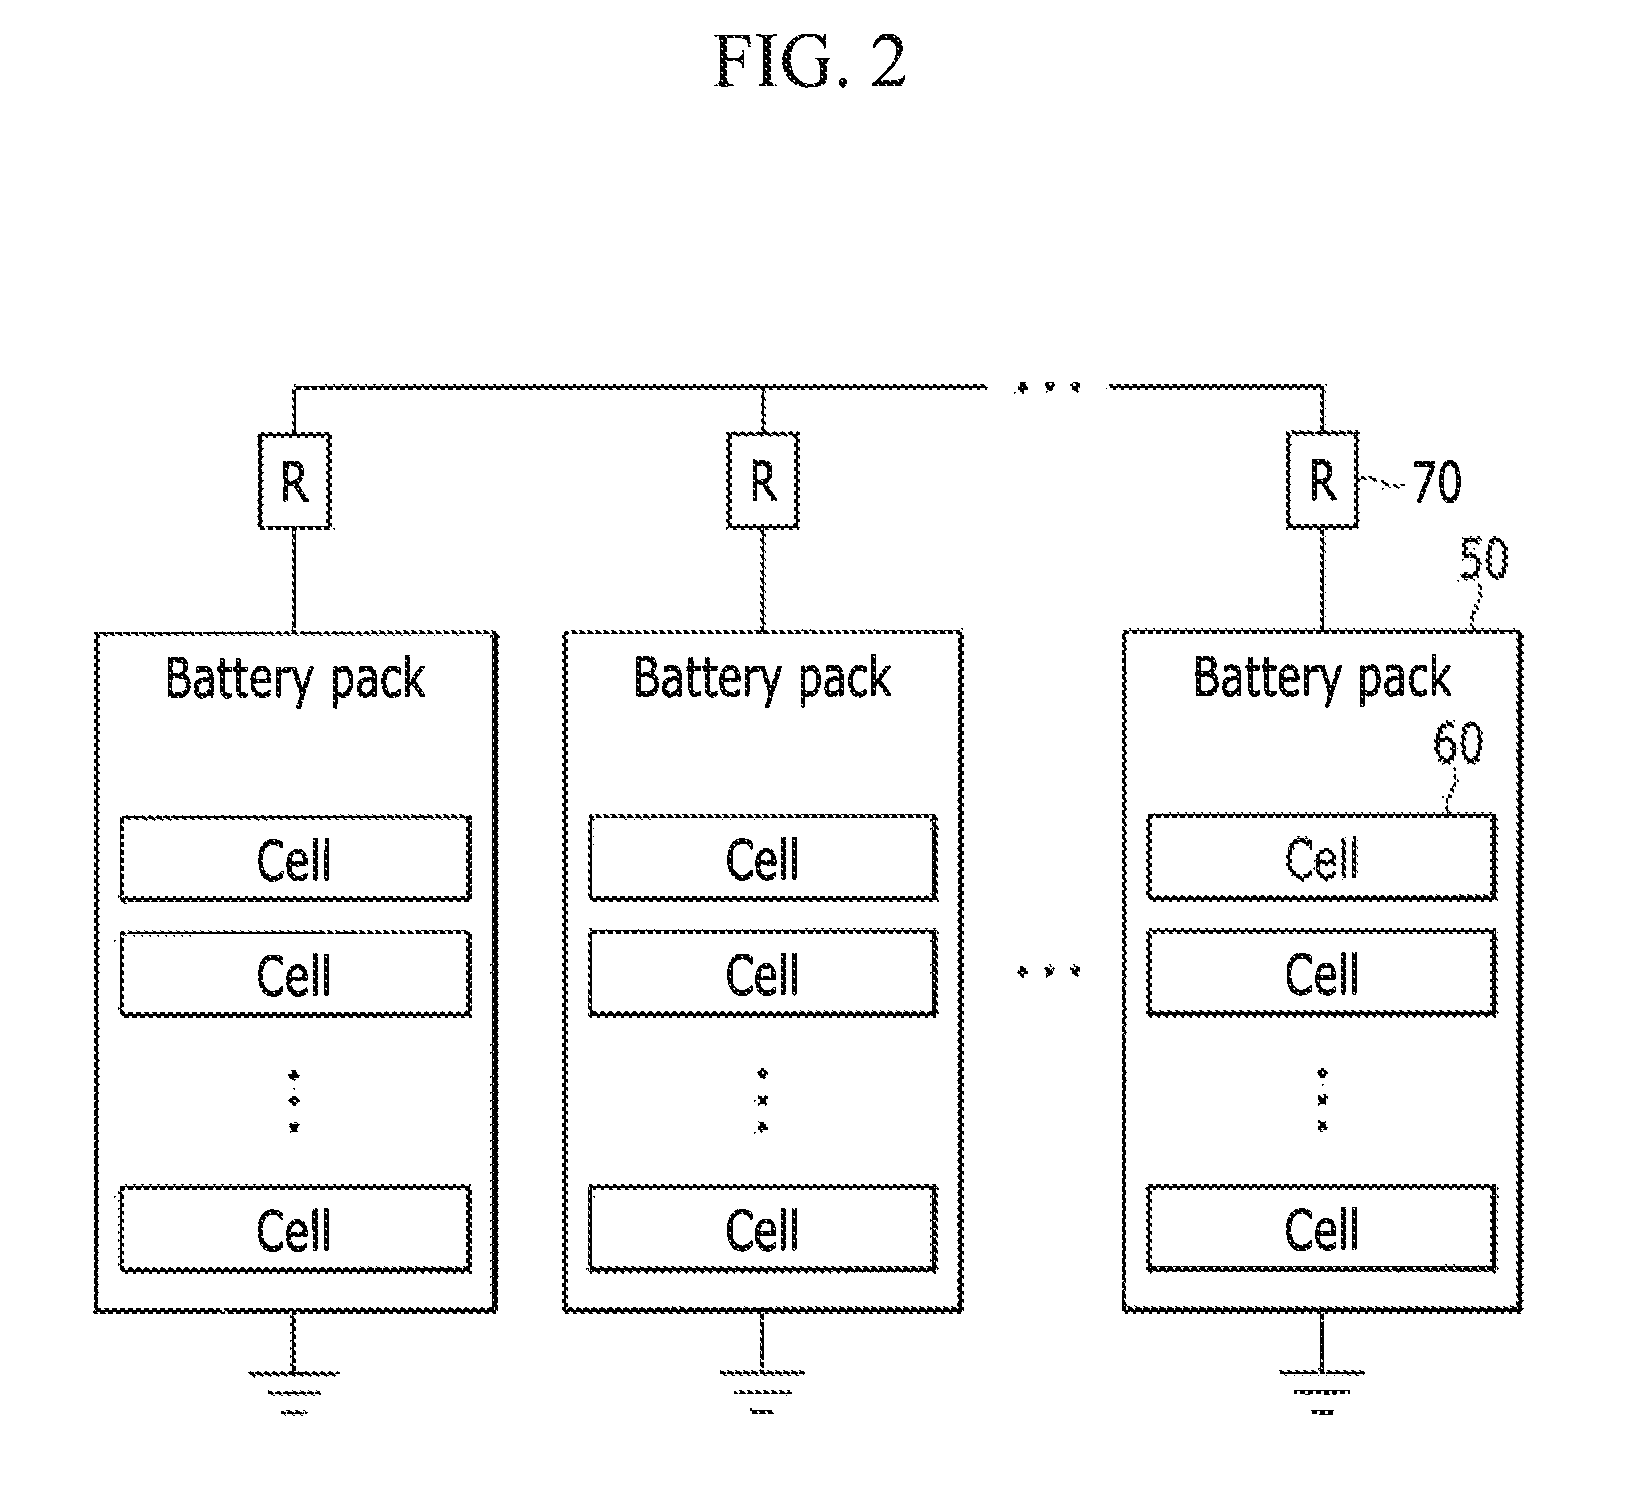 System and method for cell balancing of battery pack